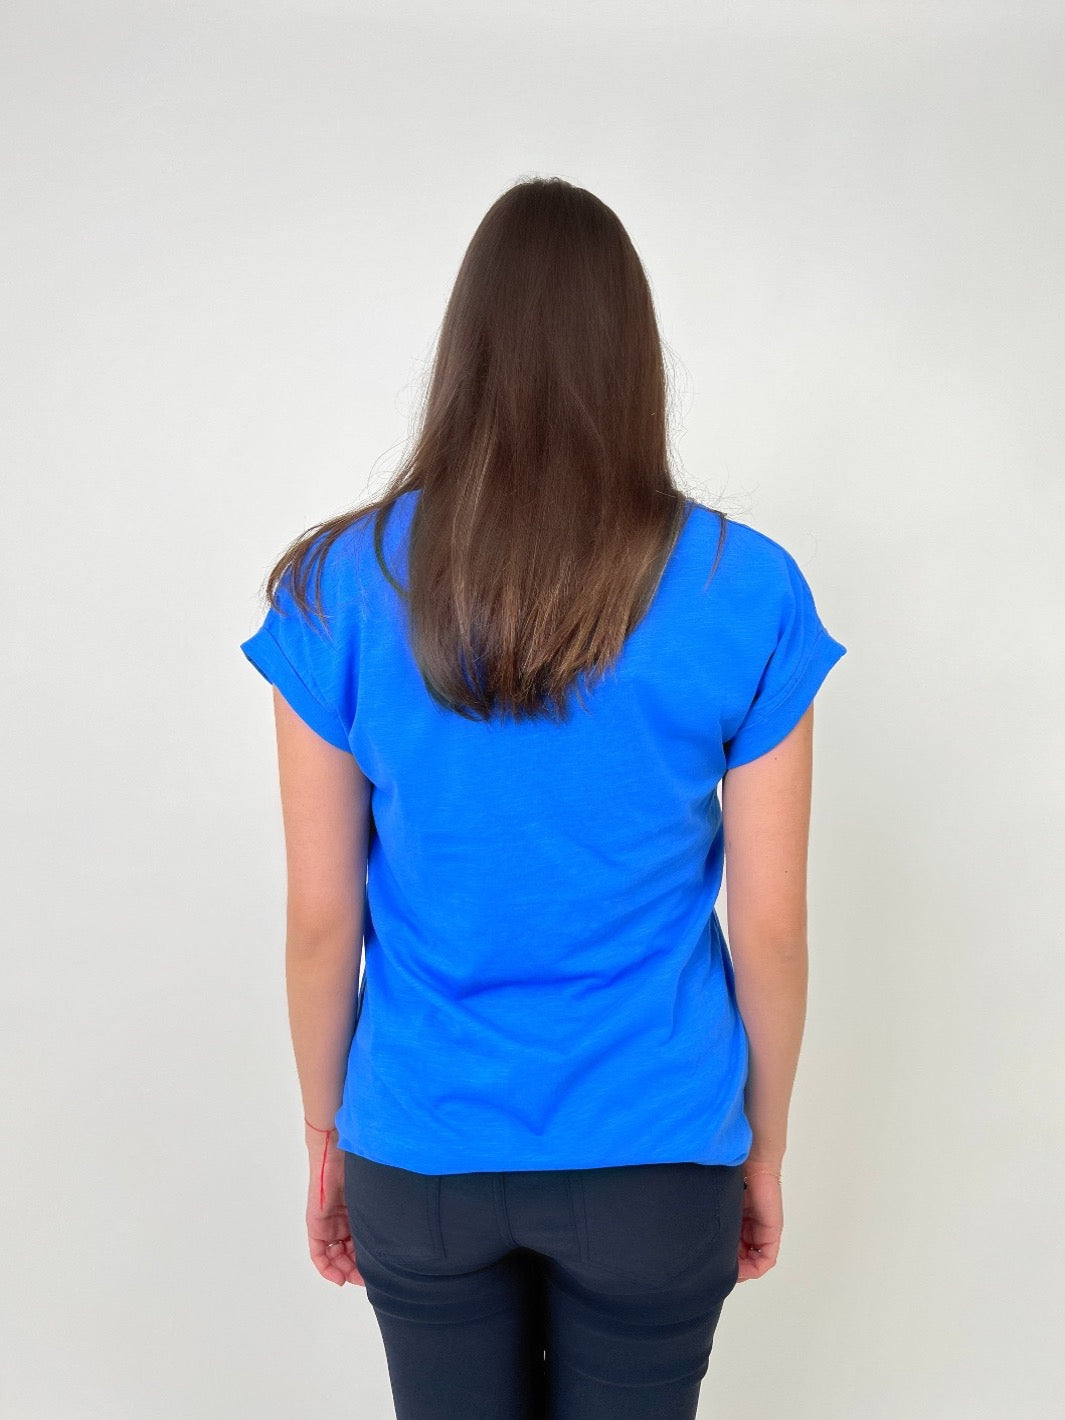 Freequent Top With Pocket In Ocean Blue-Nicola Ross